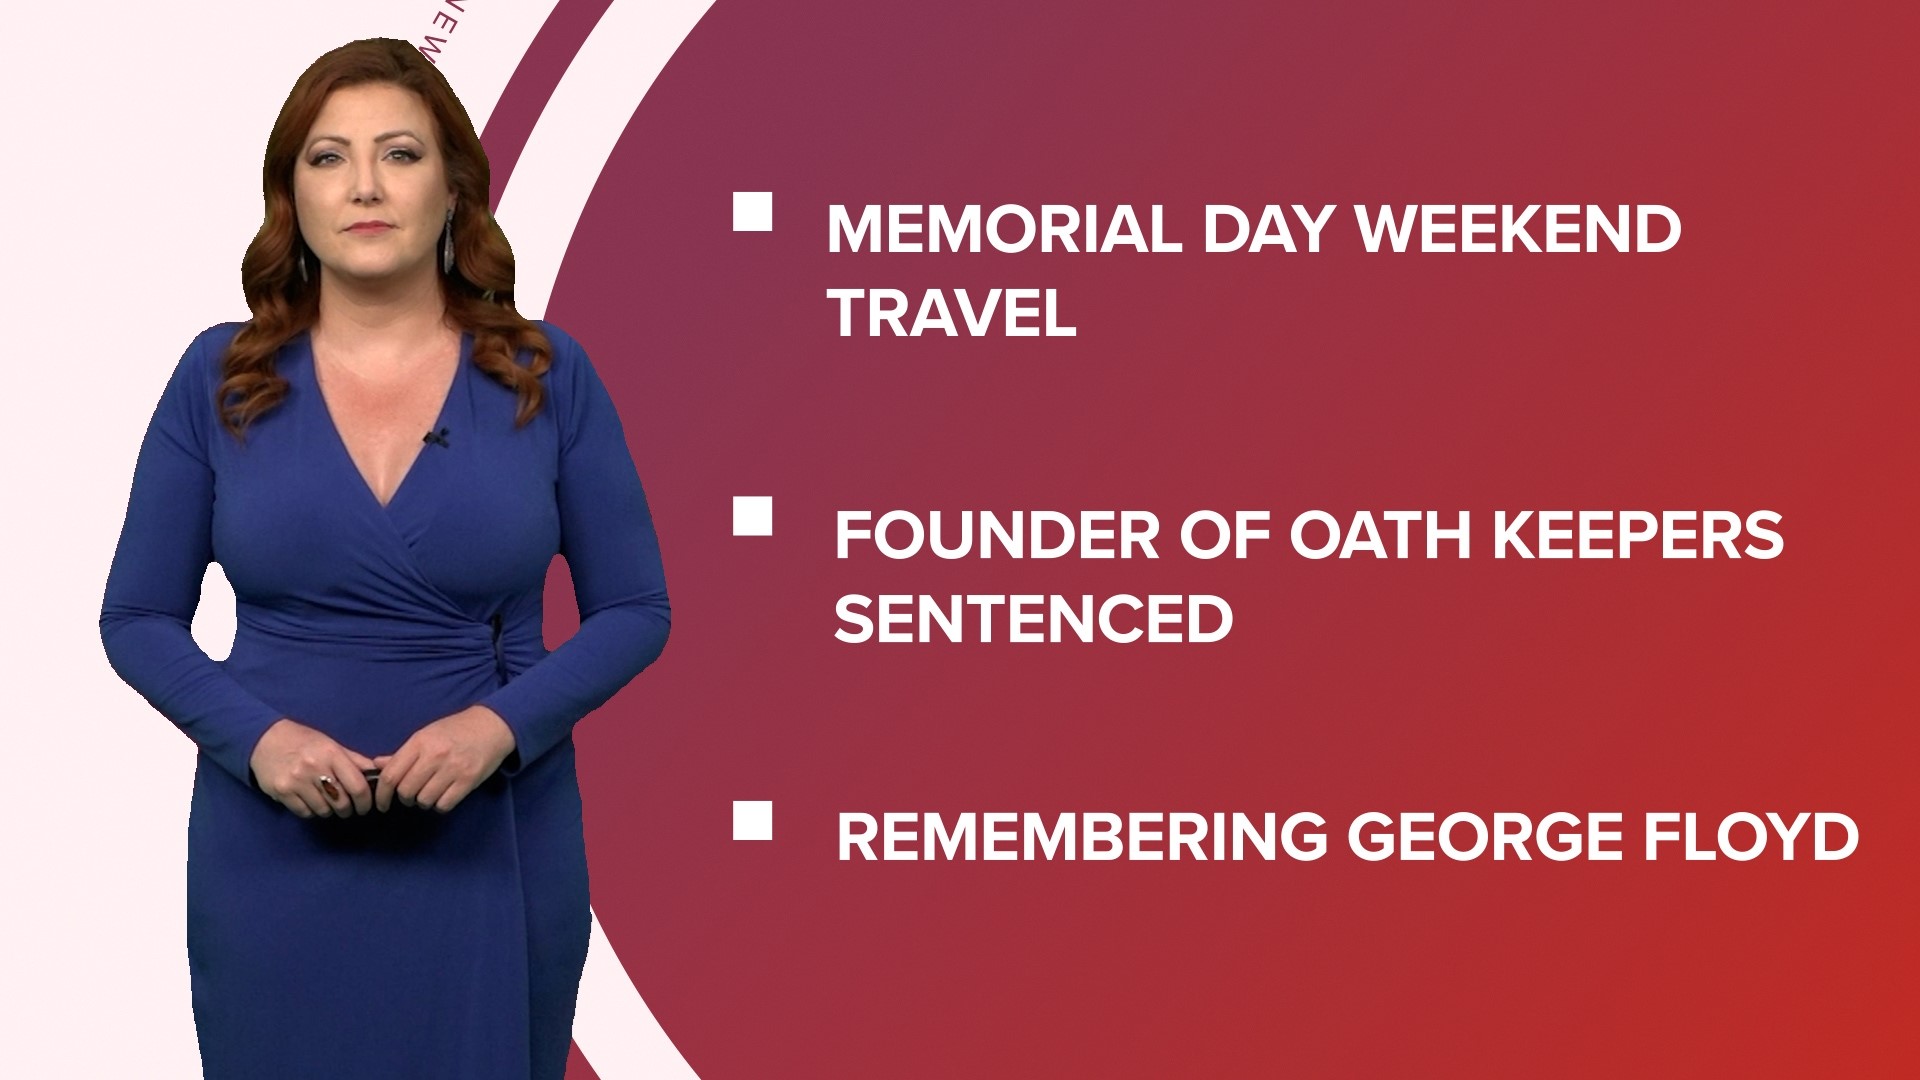 A look at what is happening in the news from  the big holiday travel weekend to the founder of Oath Keepers sentenced and remembering George Floyd.